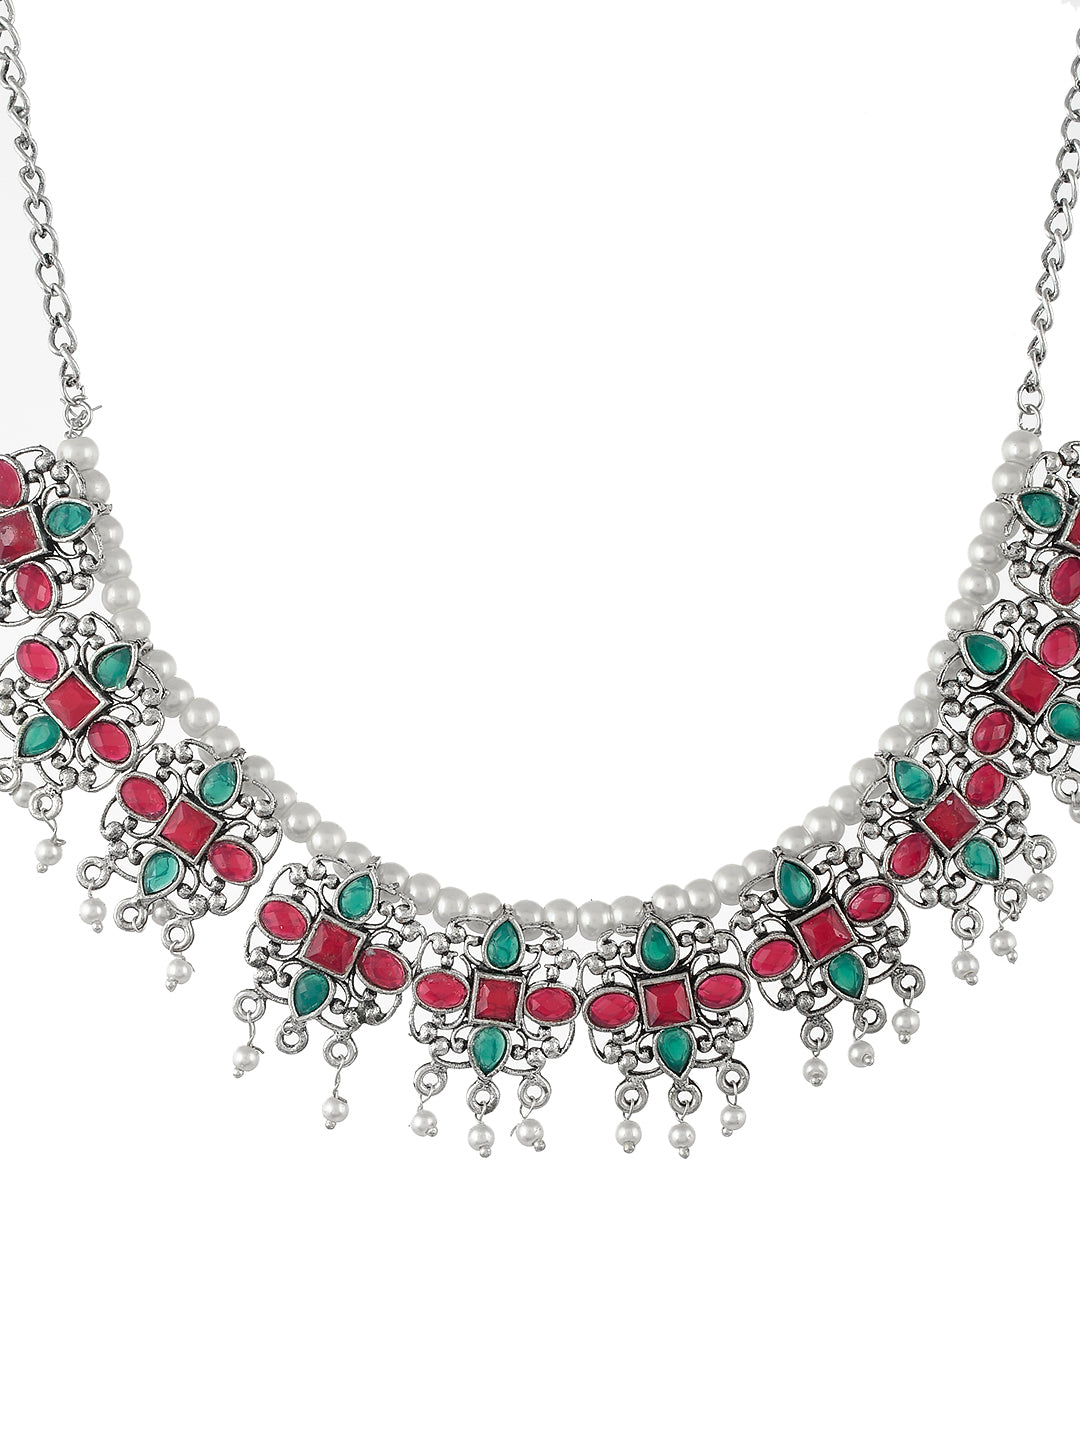 Indian Ethnic Handmade Classic Green Pink Oxidized Jewellery Set For Women